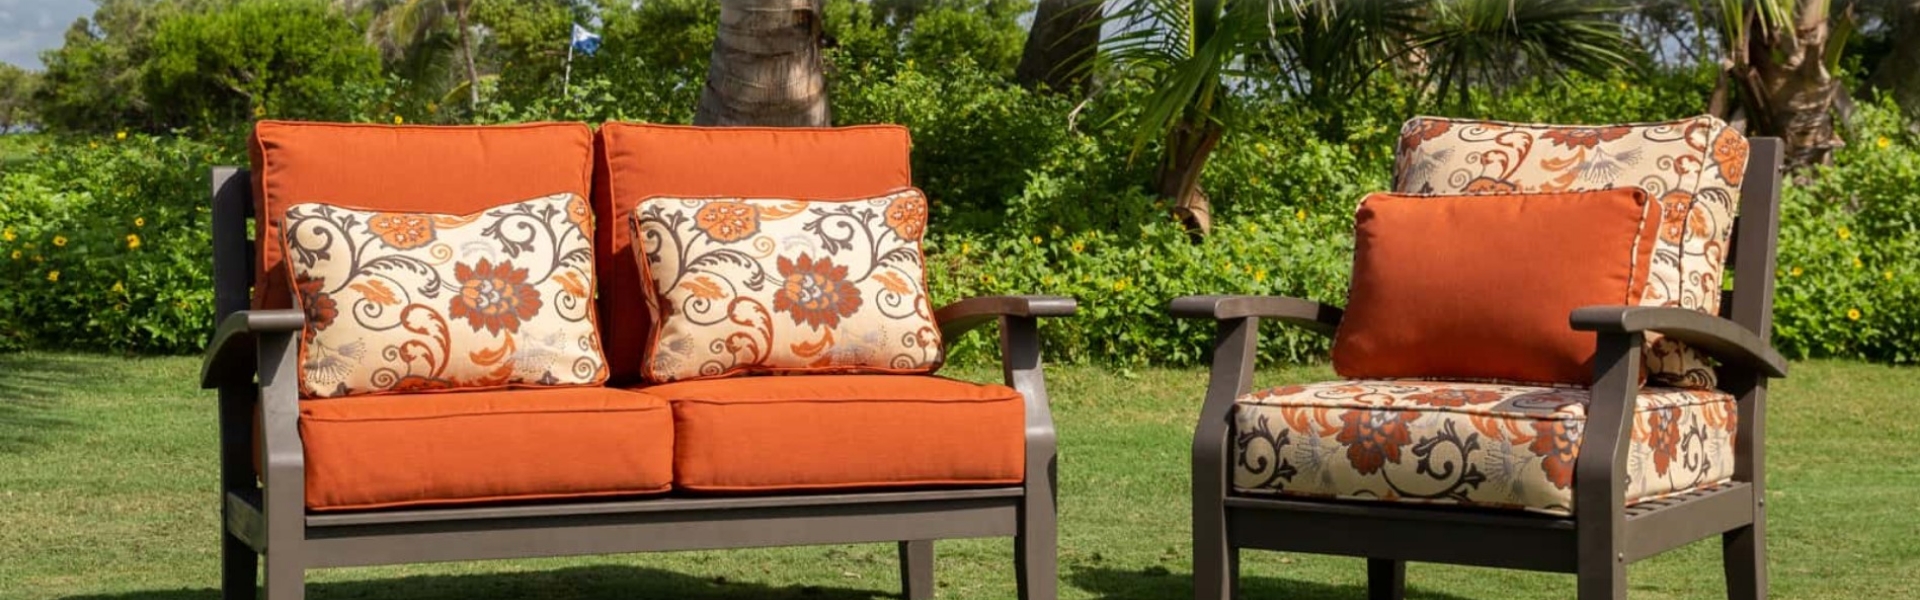 Outdoor Replacement Cushions Orange County CA 